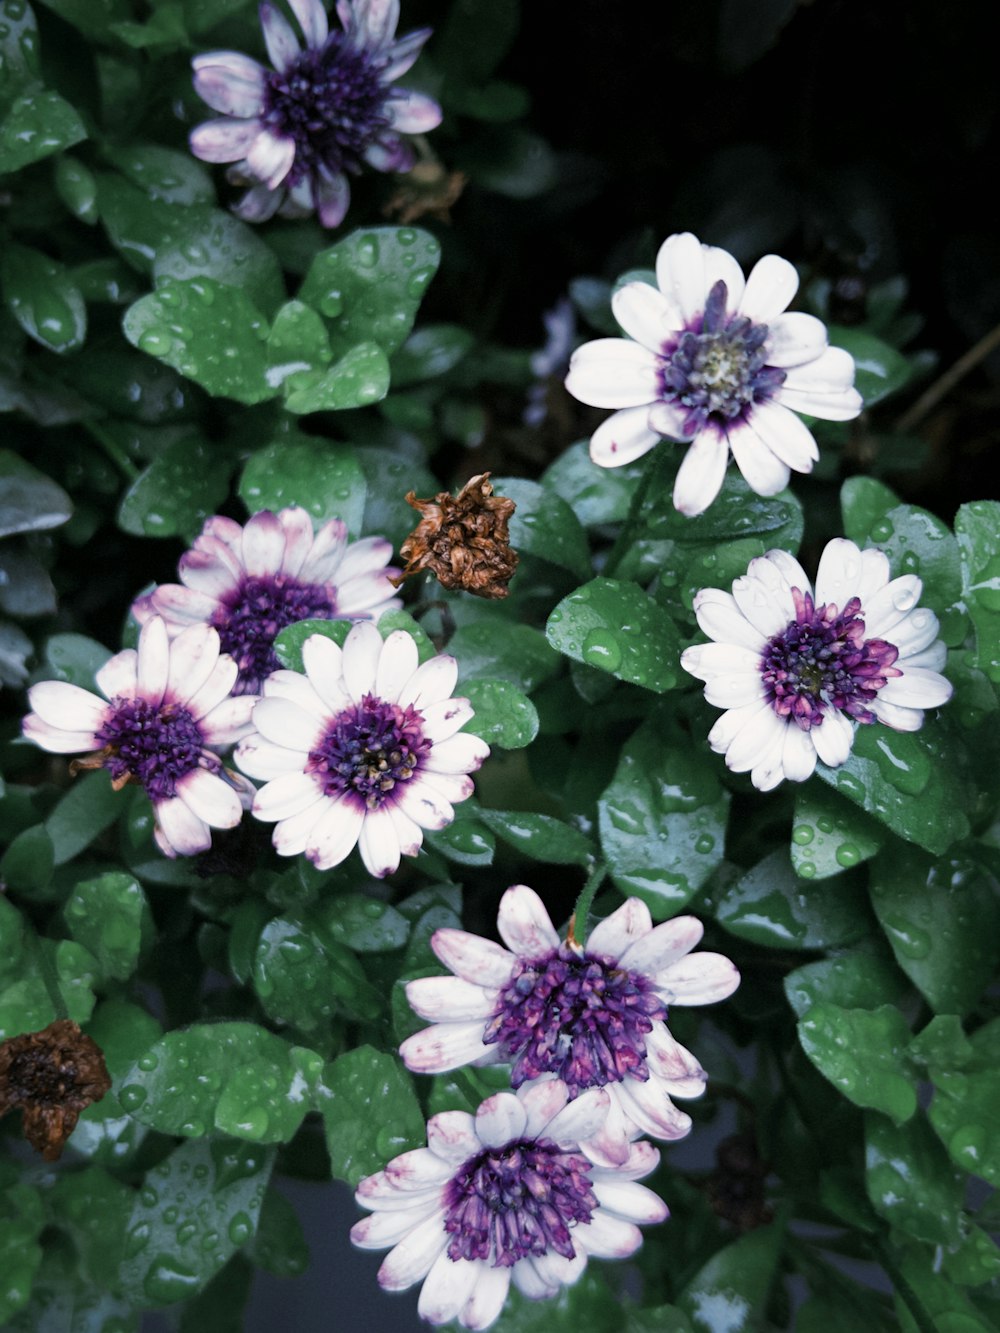 purple and white flowers with green leaves in the background